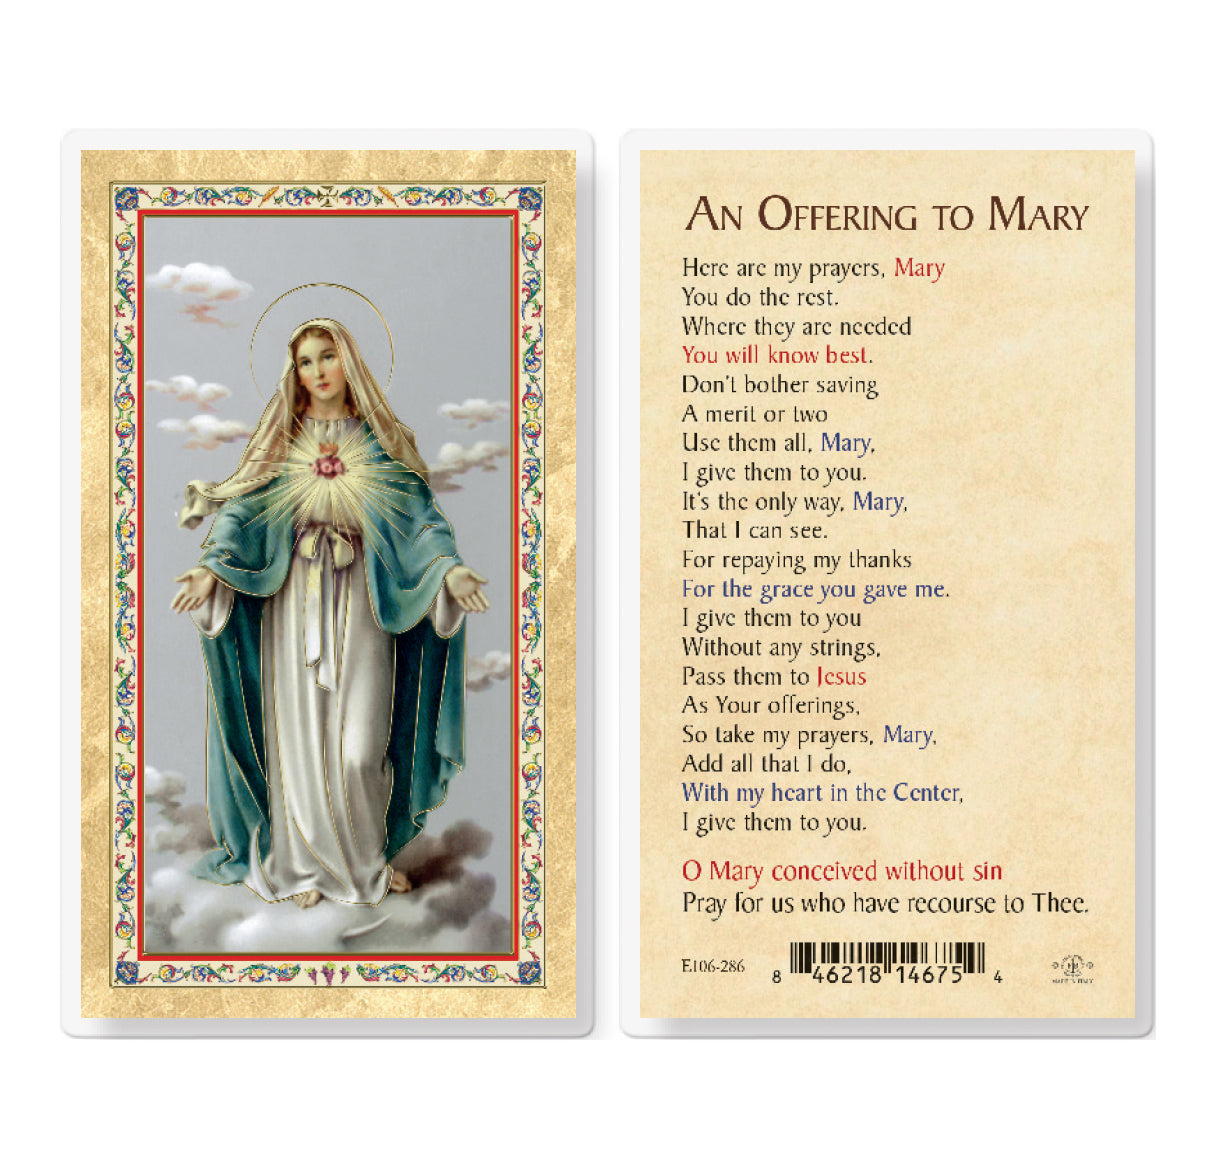 An Offering to Mary - IHM Gold-Stamped Laminated Catholic Prayer Holy Card with Prayer on Back, Pack of 25